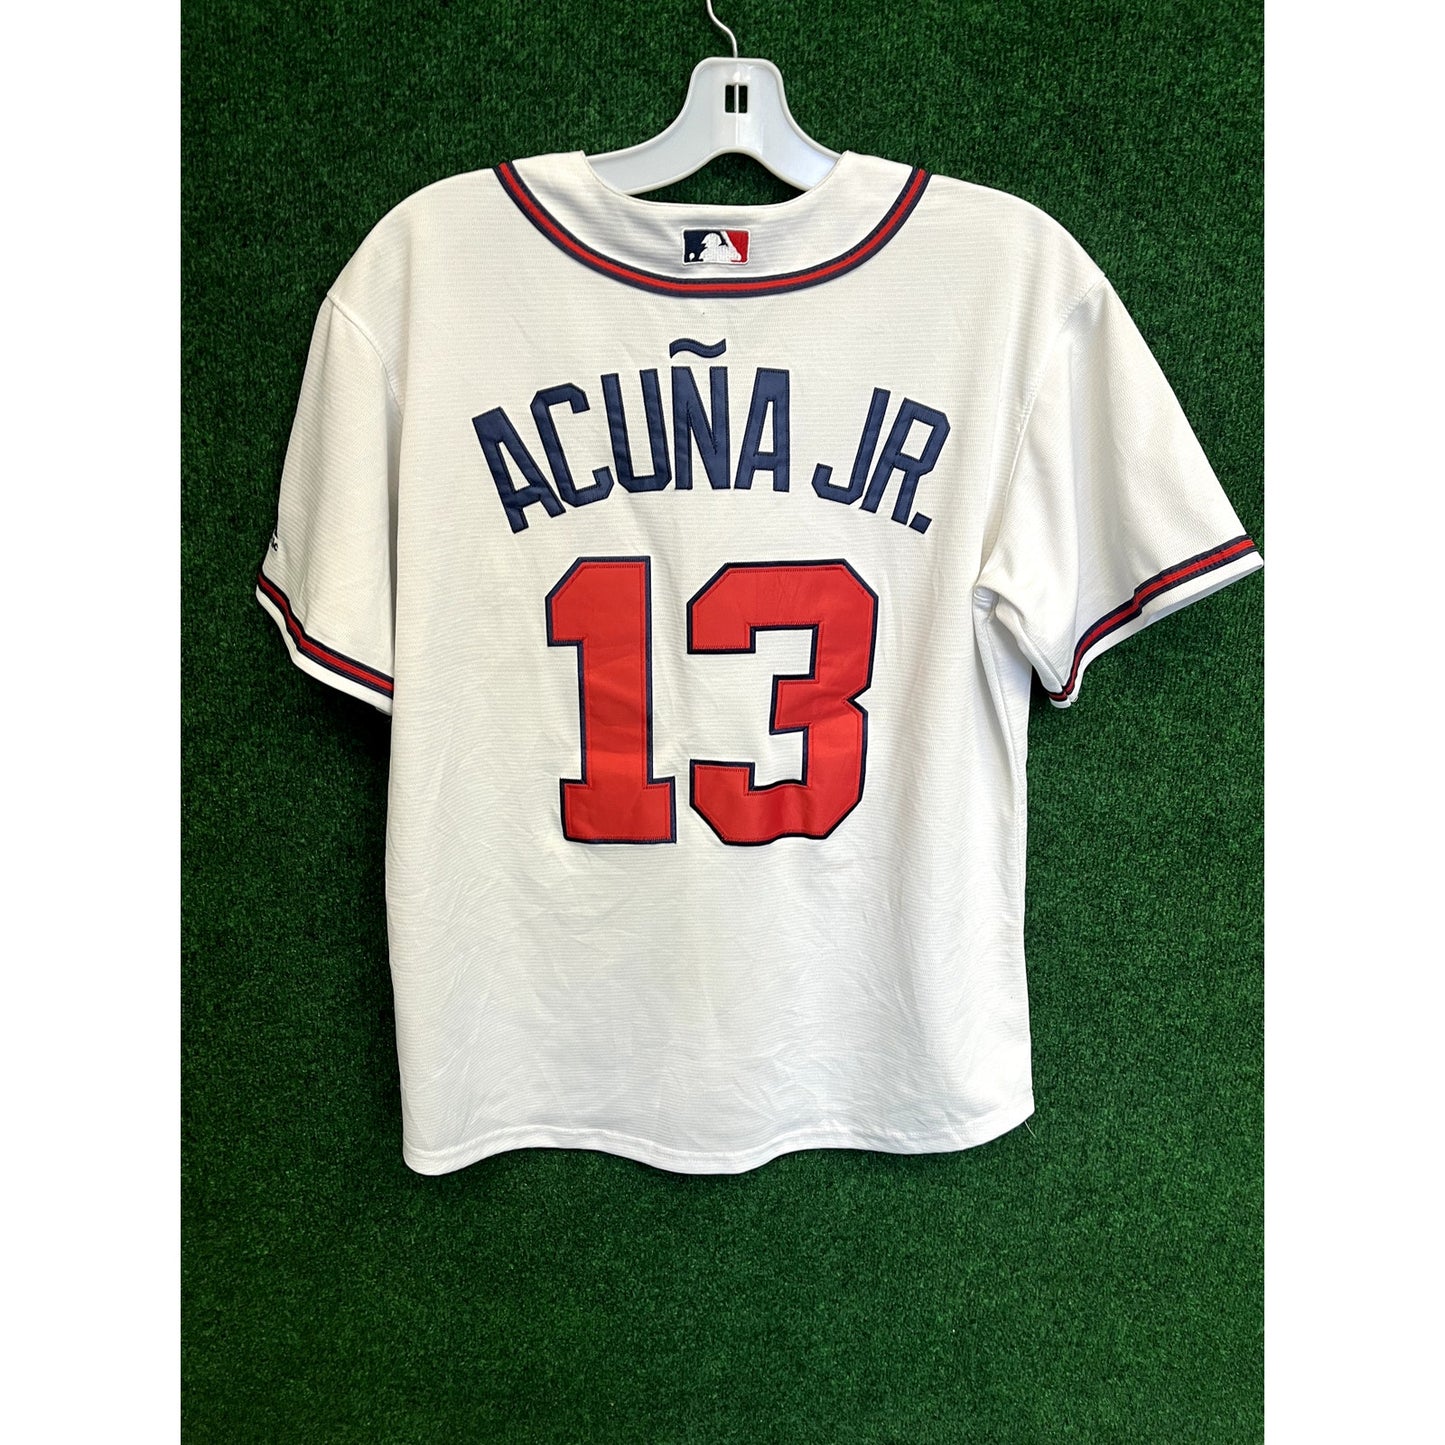 MLB Atlanta Braves Ronald Acuna Button Up White Home Jersey Sz Large